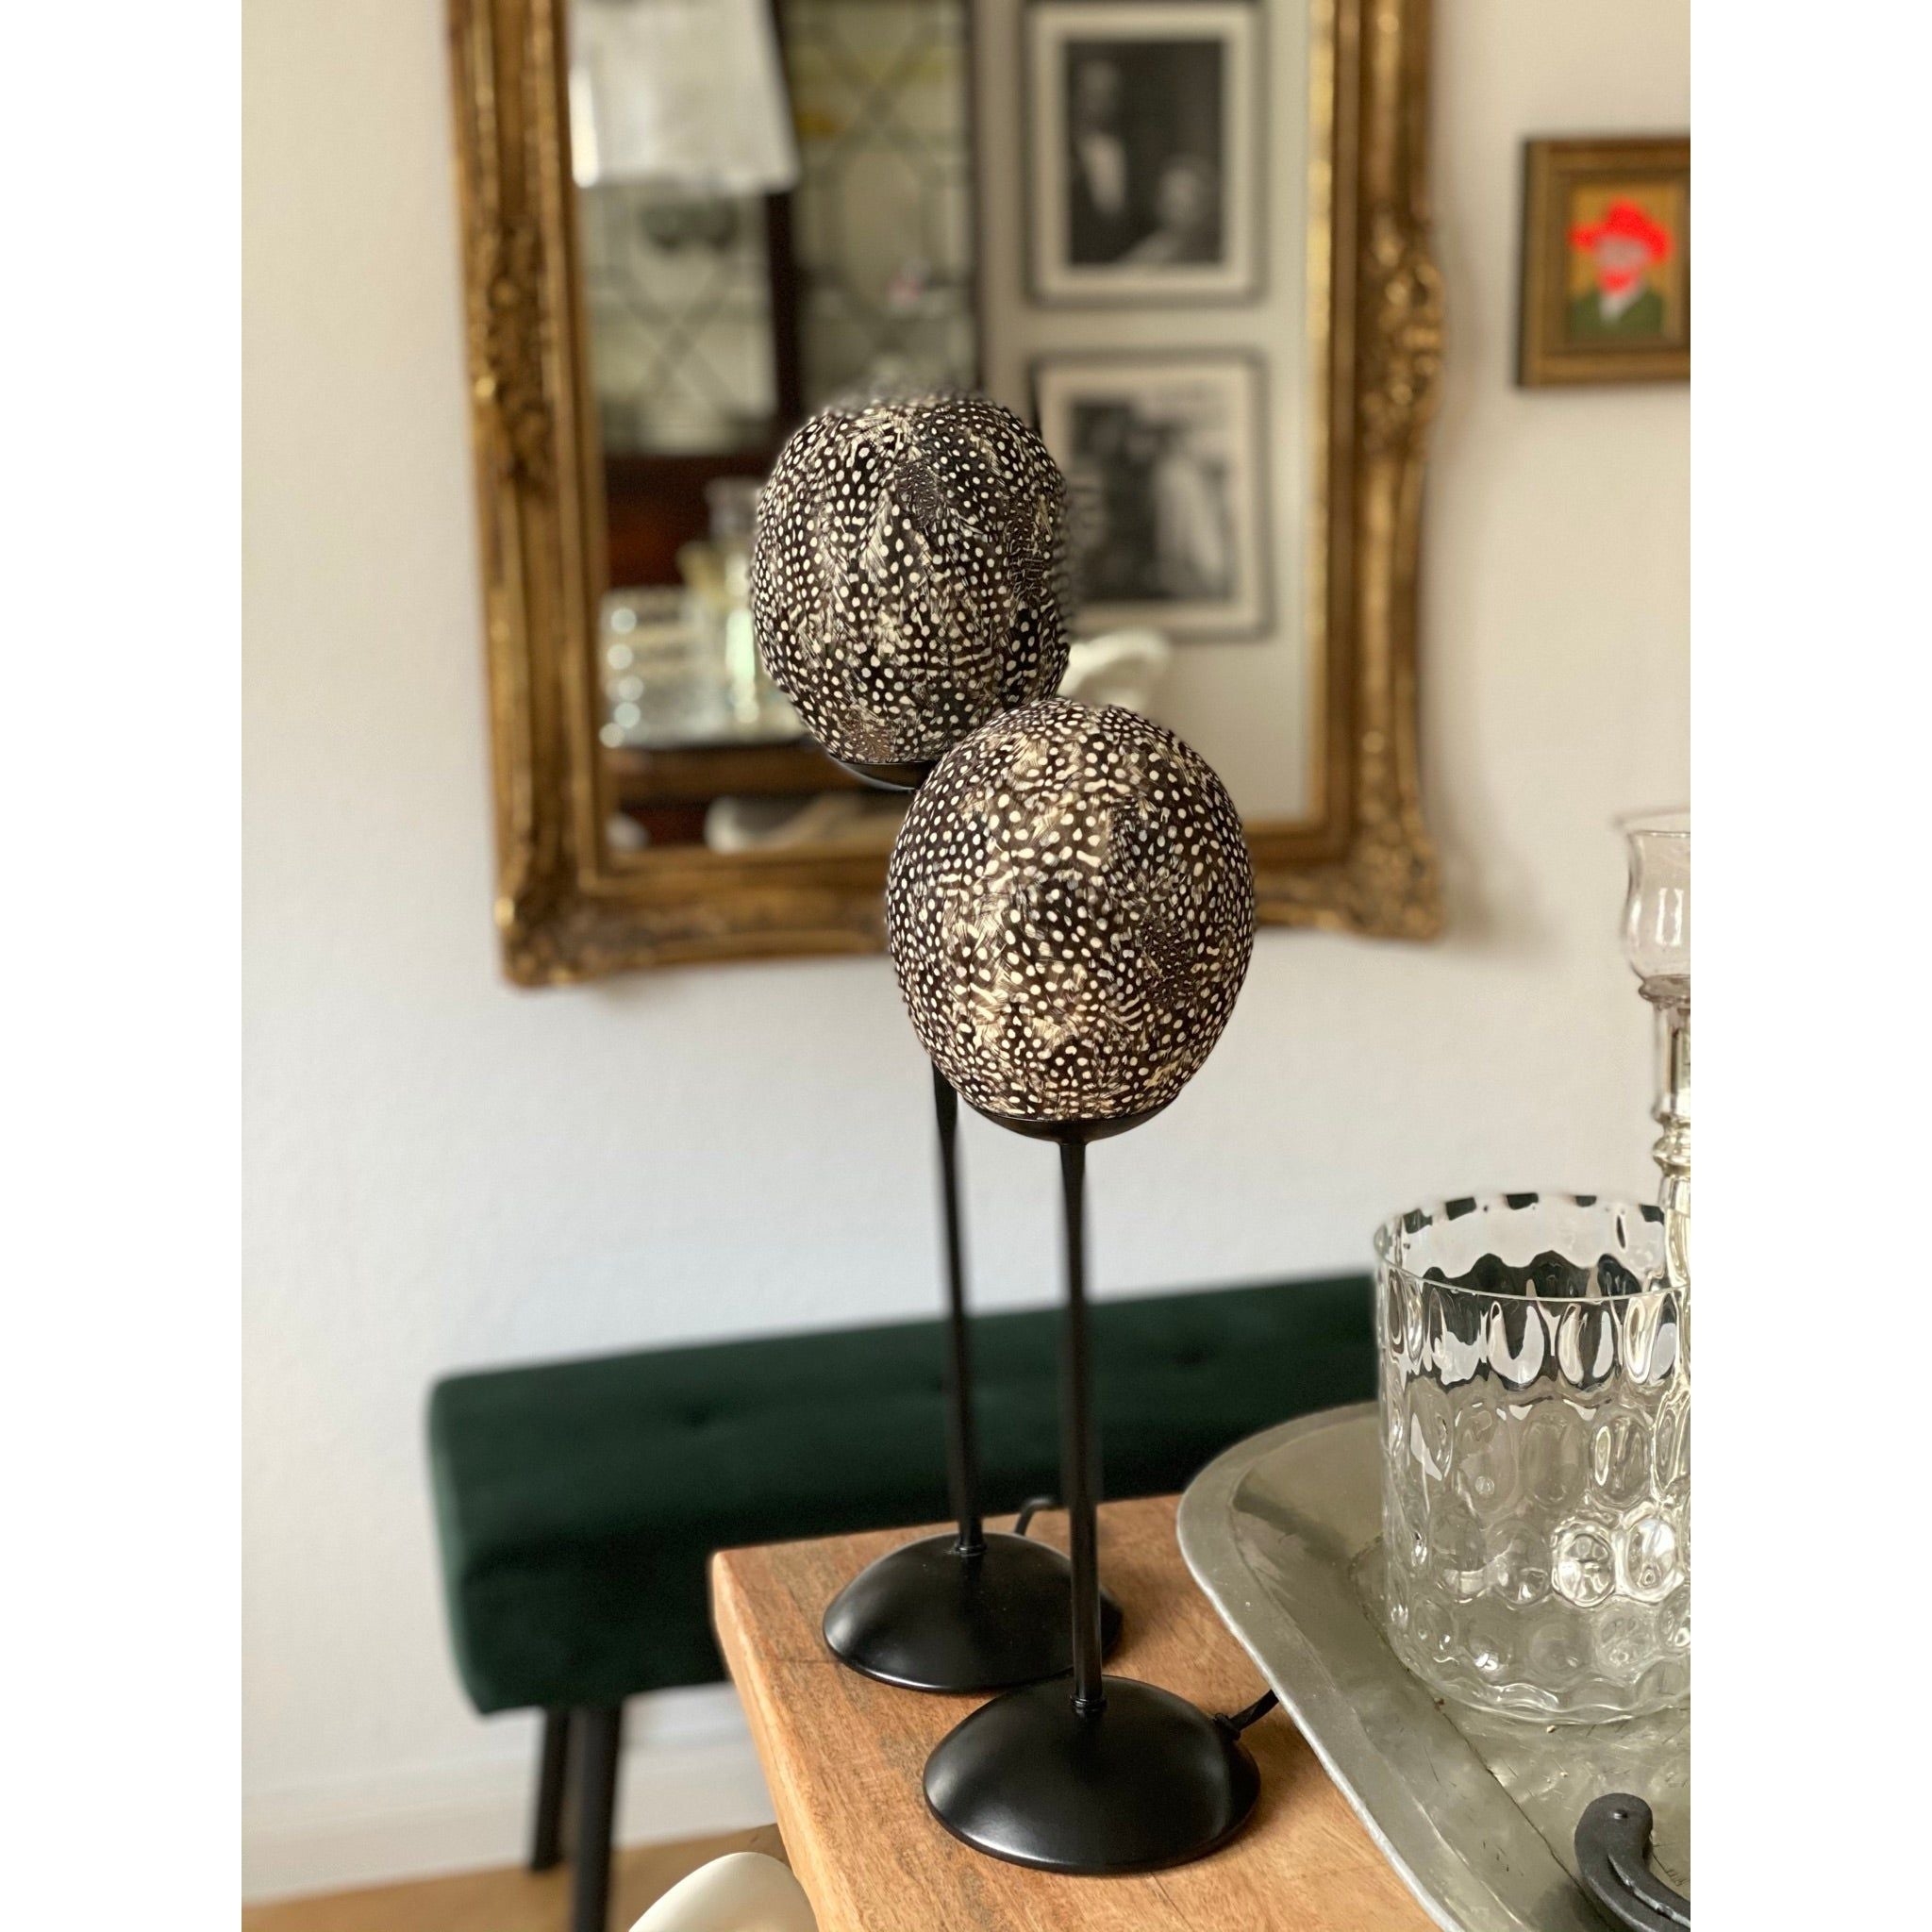 Ostrich egg lamp decorated all around with real guinea fowl feathers